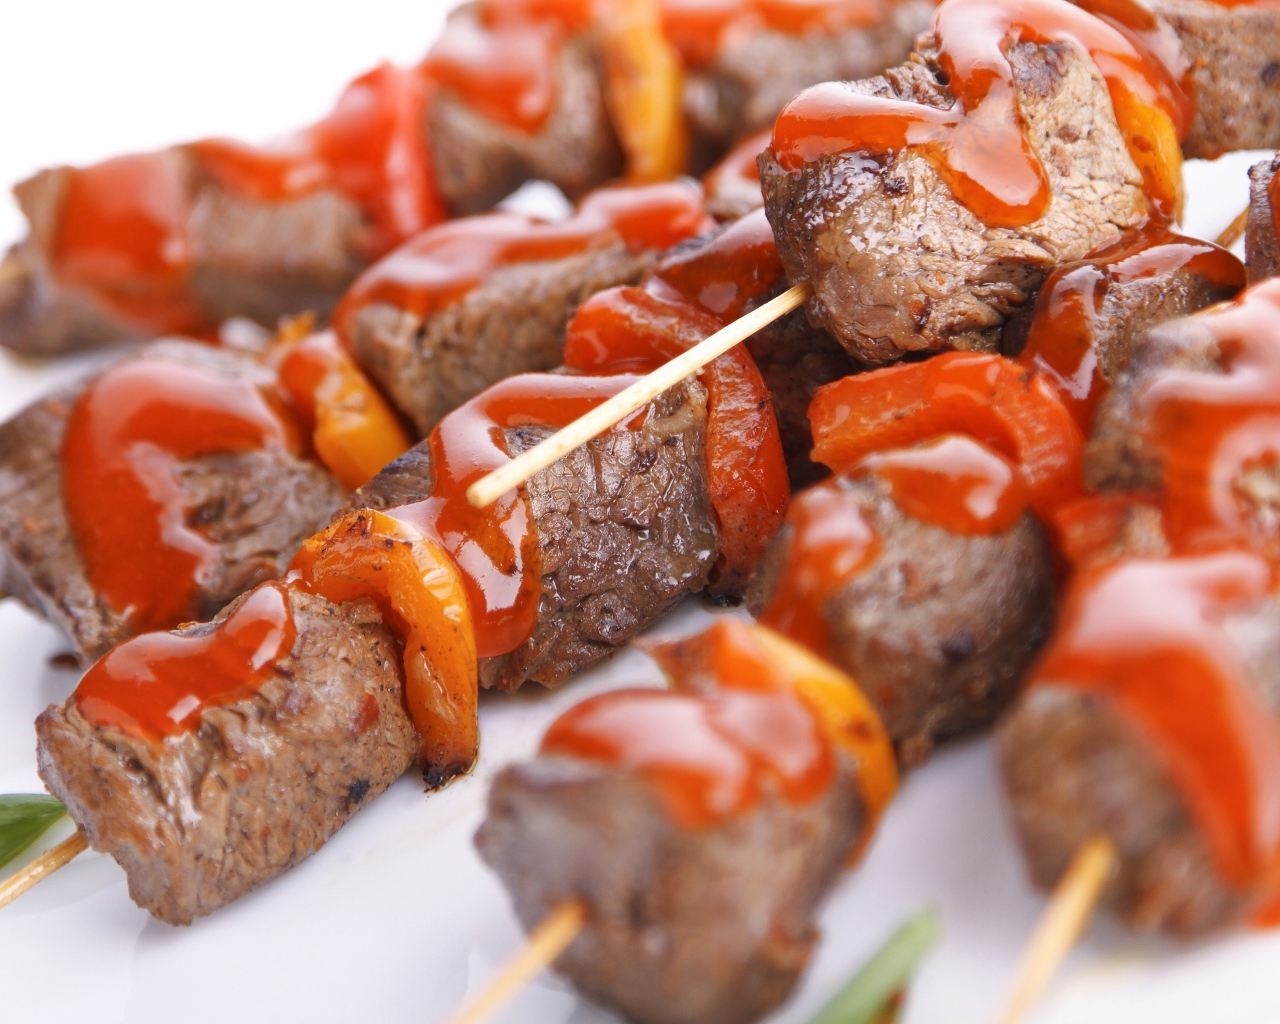 Shish Kebab On Wooden Skewers With Sauce Desktop Wallpapers 1280x1024 Images, Photos, Reviews